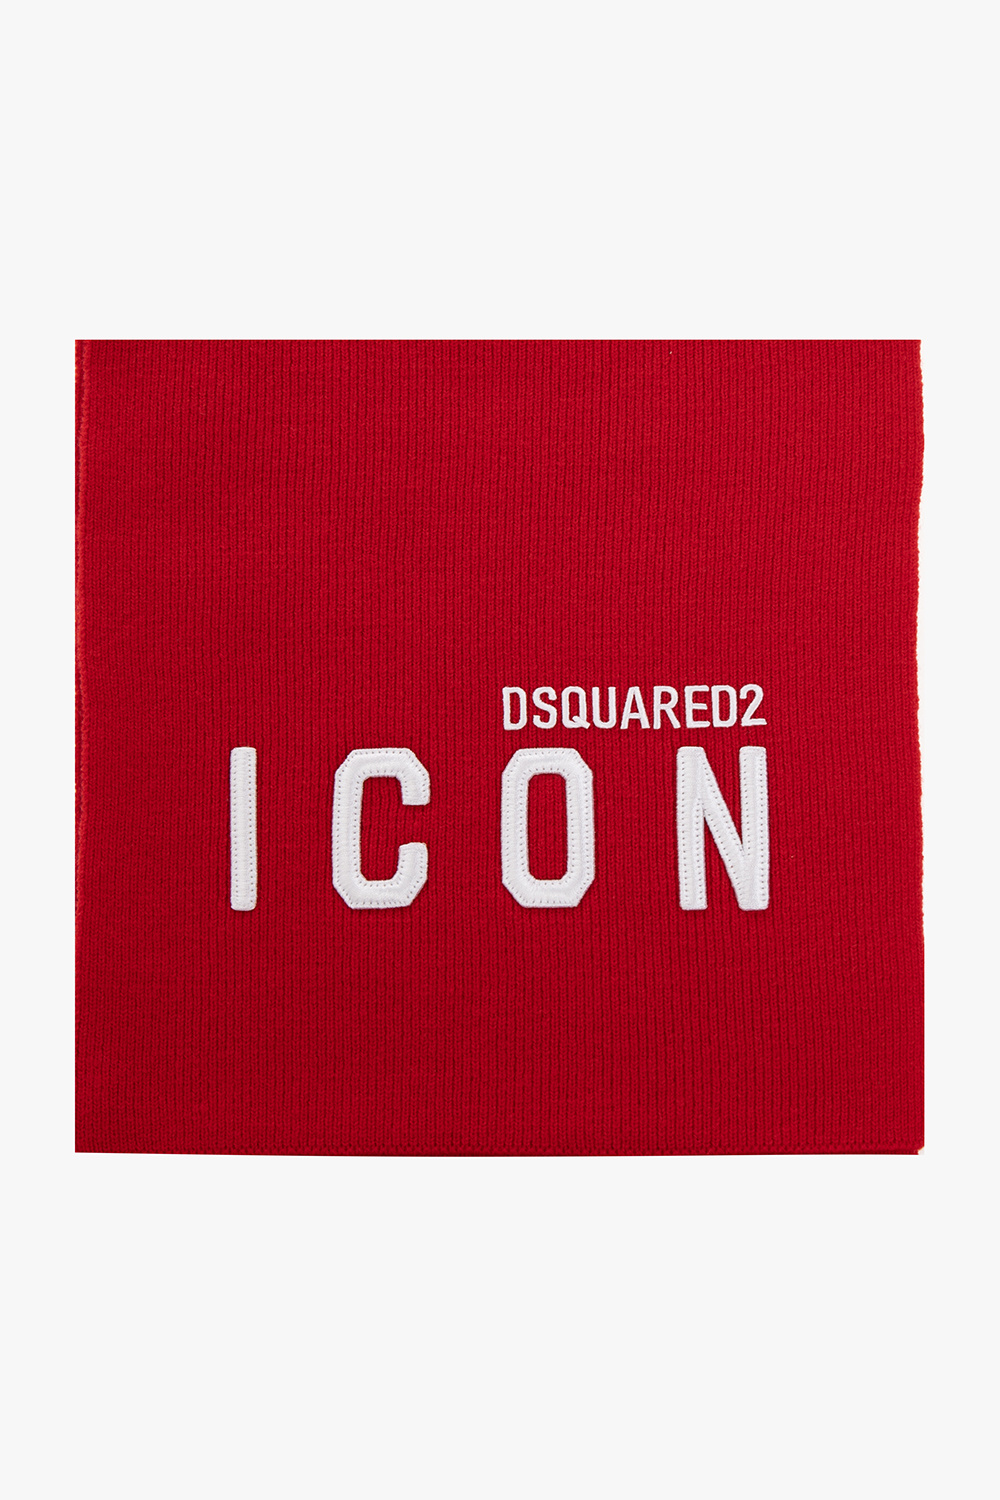 Dsquared2 Add to bag